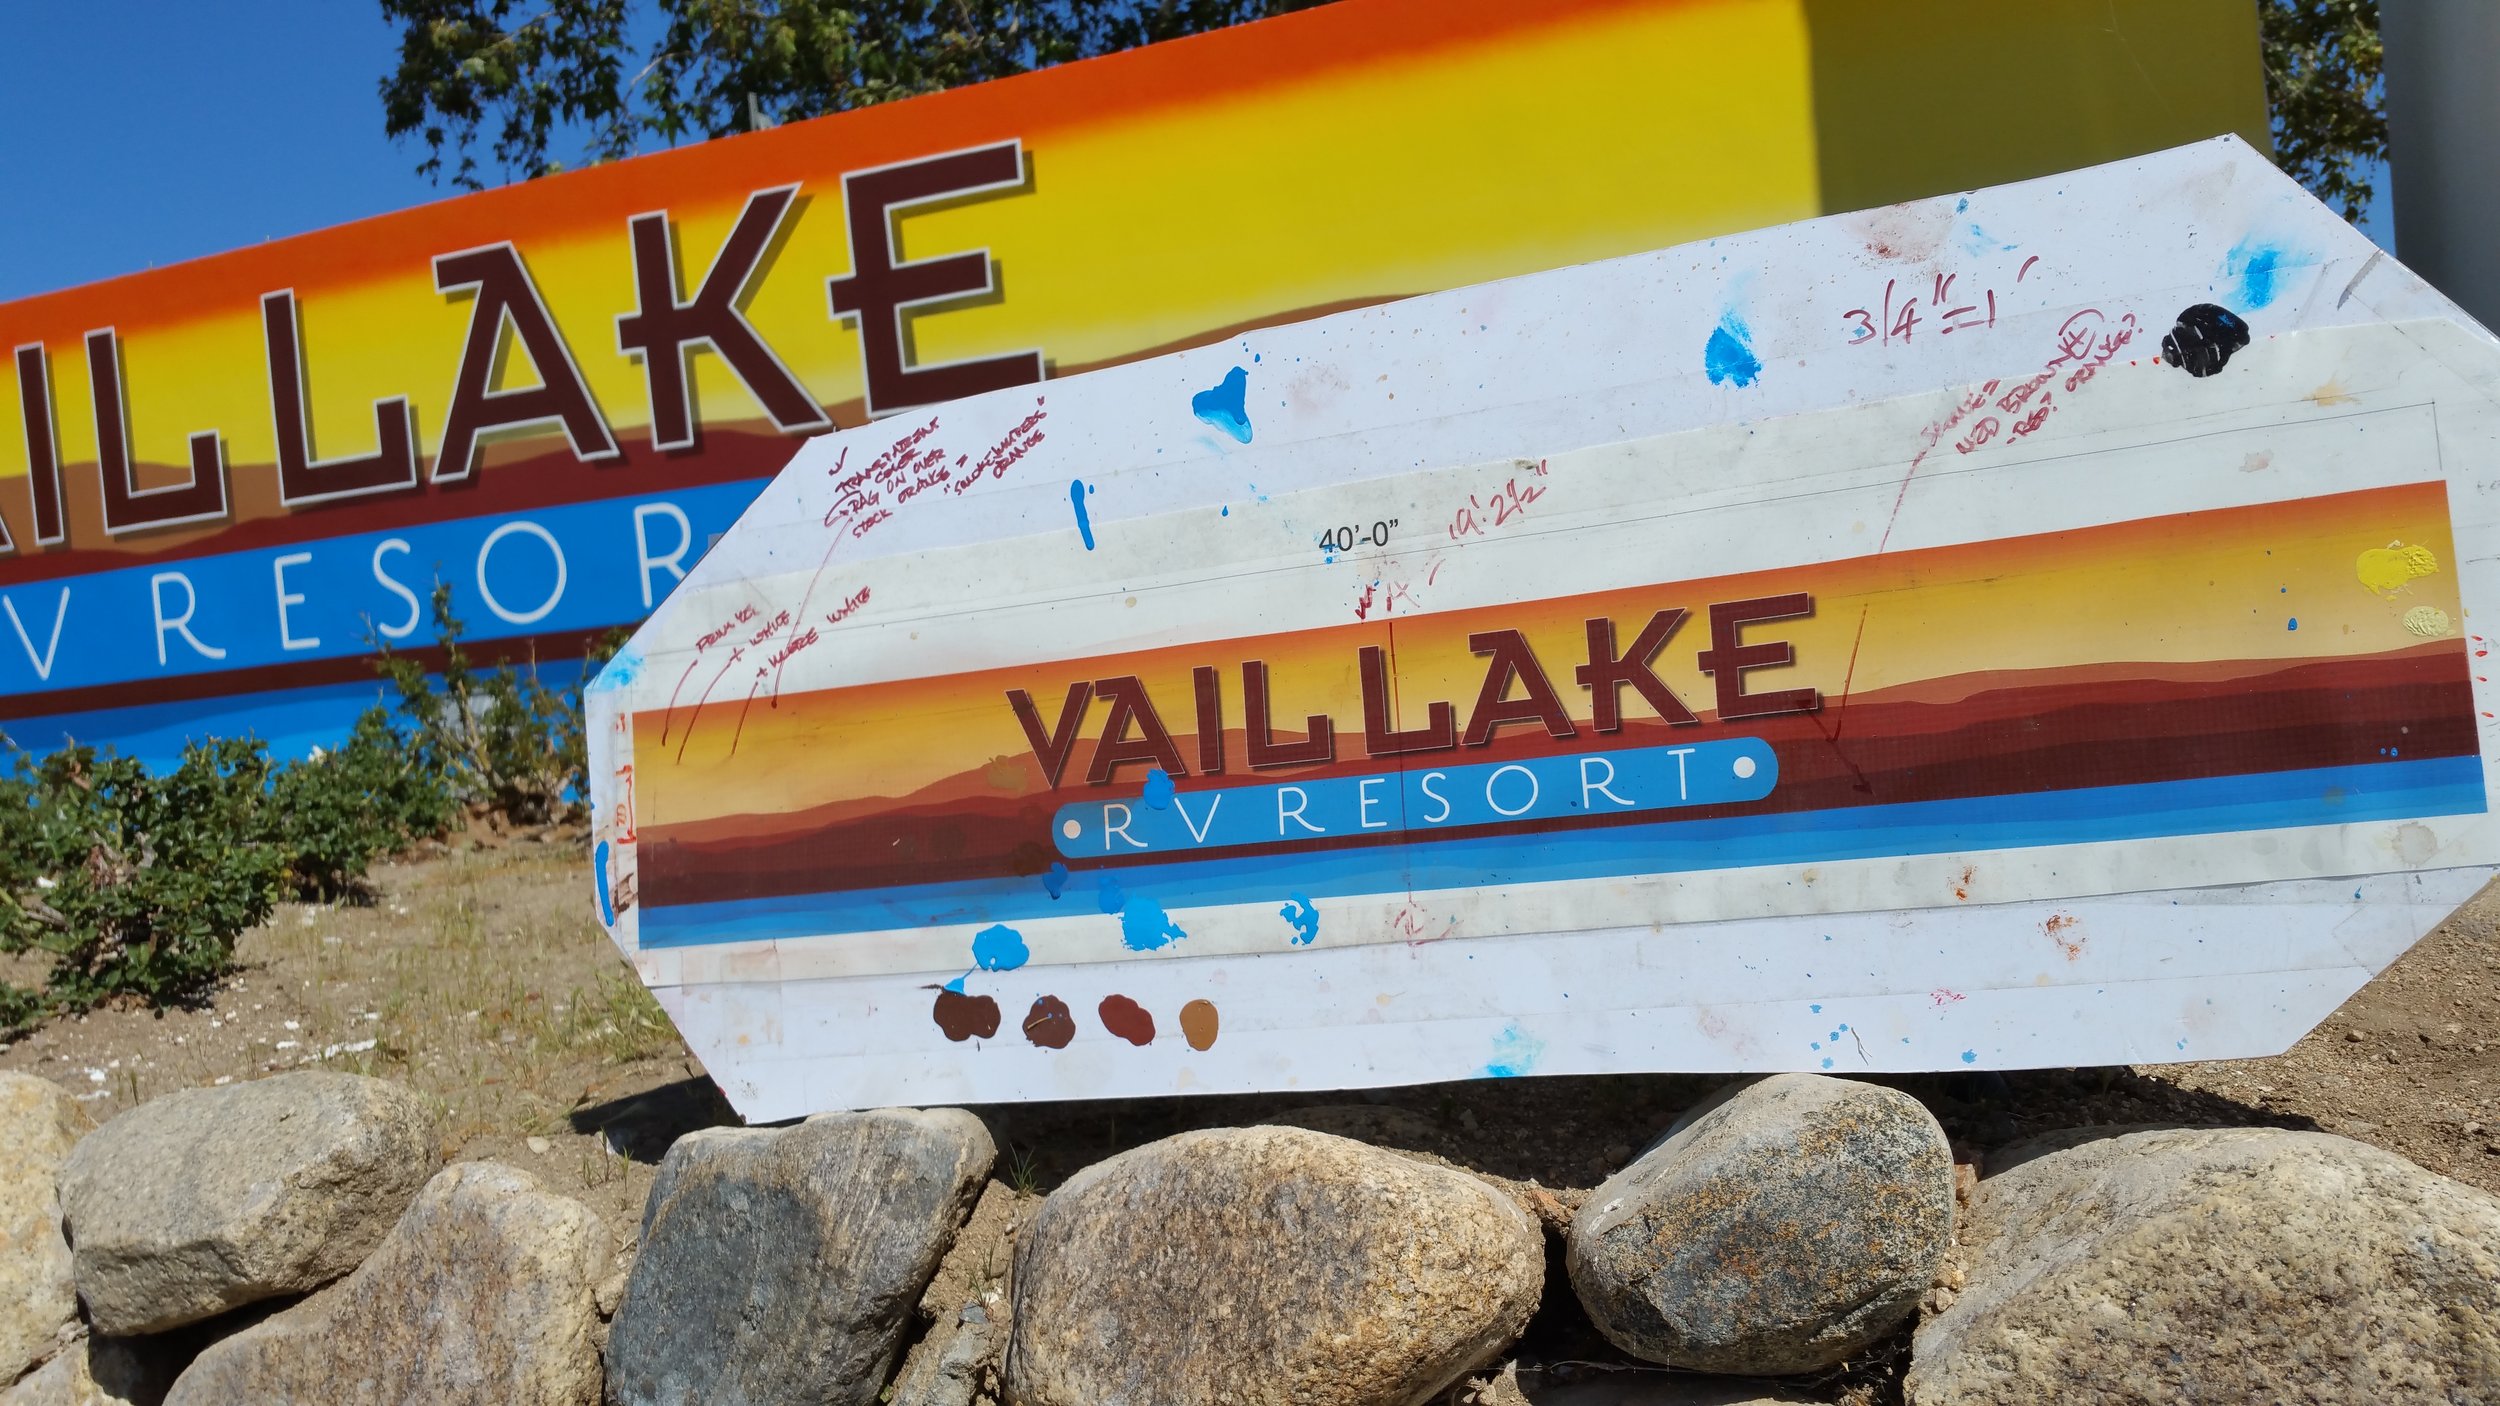 Vail Lake RV Resort - hand painted monument sign mural